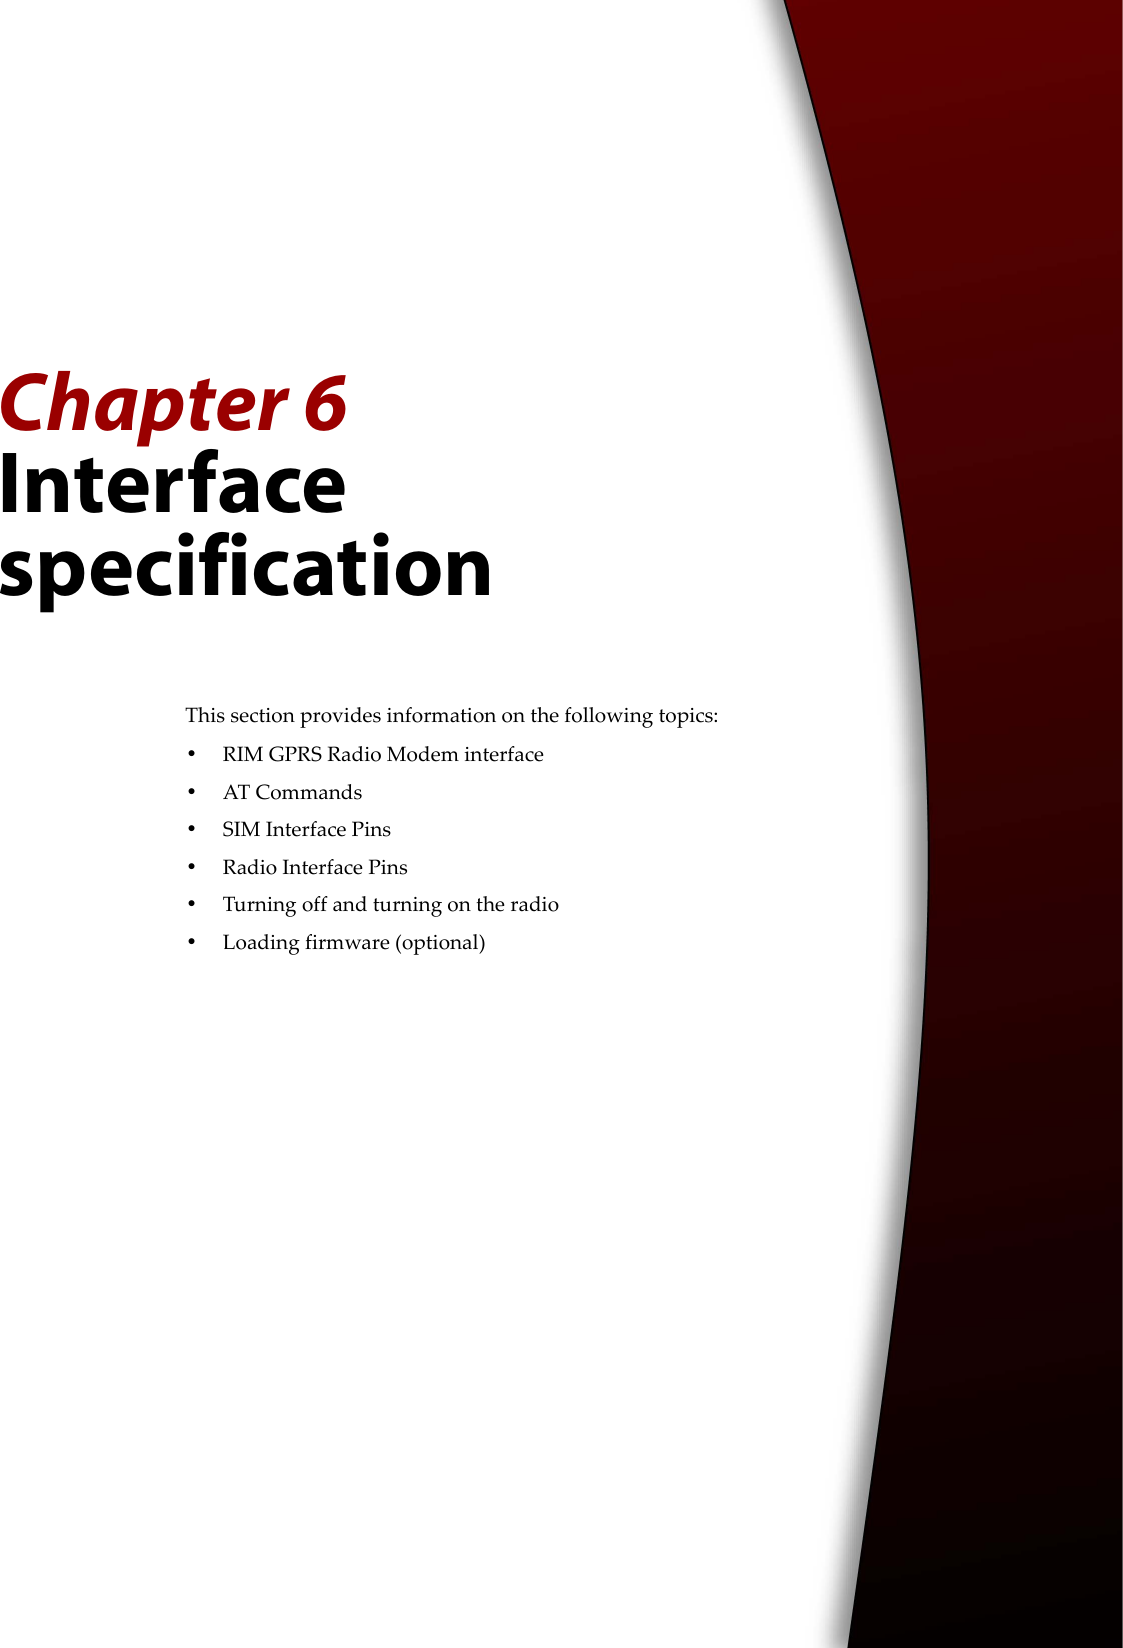 Chapter 6Interface specificationThis section provides information on the following topics:•RIM GPRS Radio Modem interface•AT Commands•SIM Interface Pins•Radio Interface Pins•Turning off and turning on the radio•Loading firmware (optional)